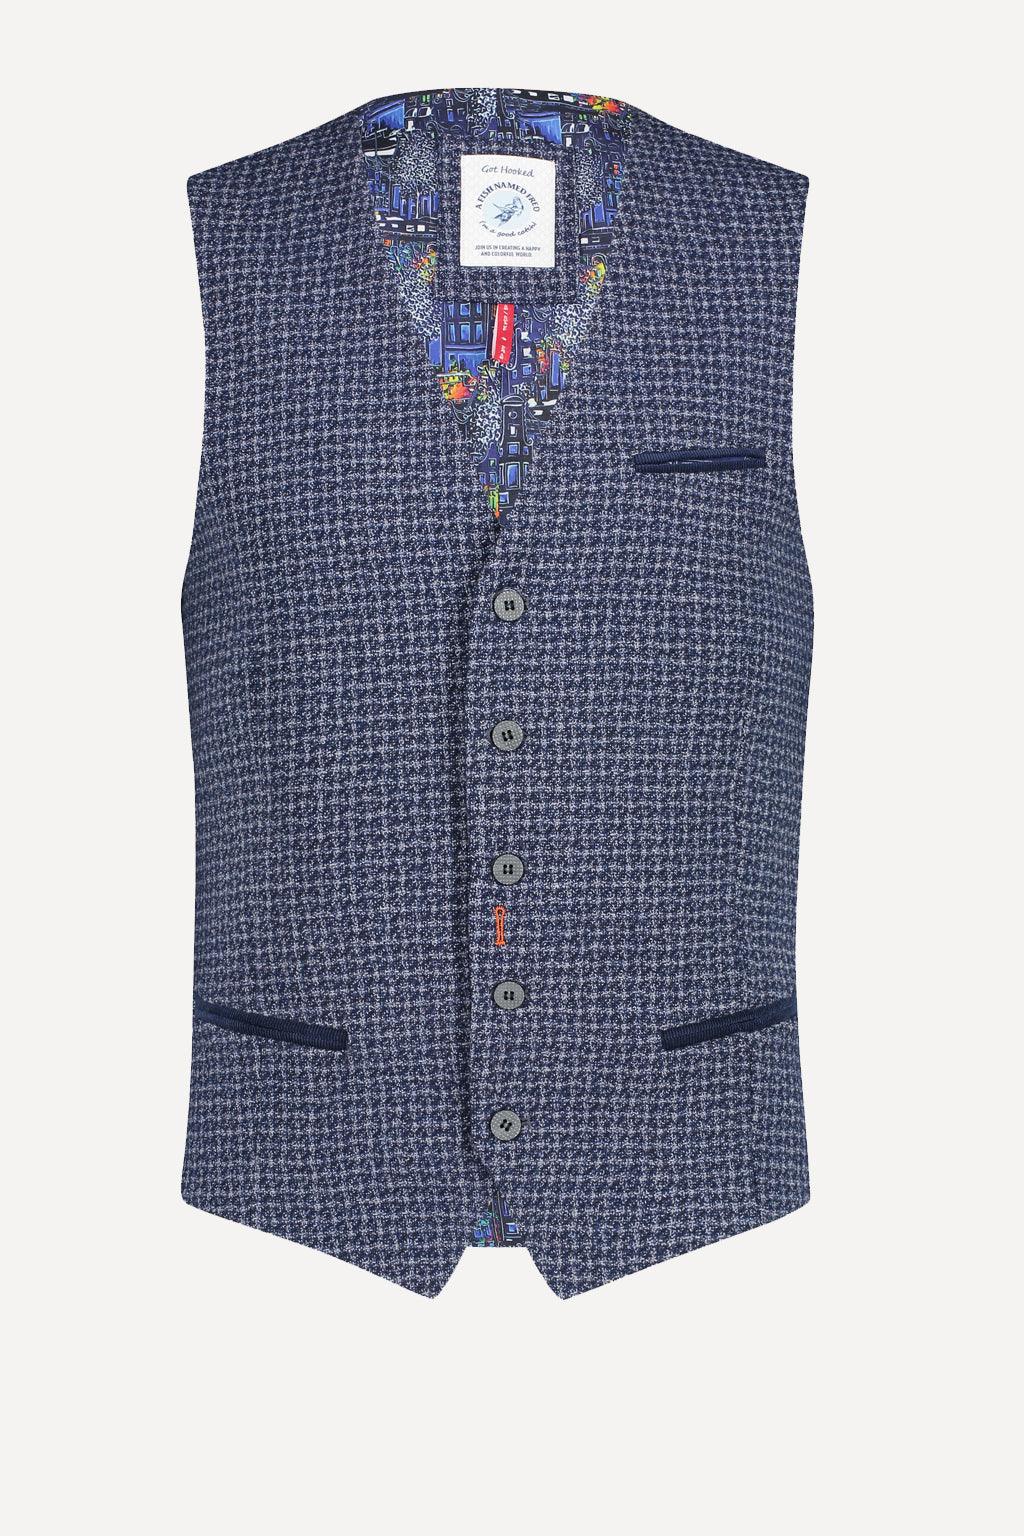 A Fish Named Fred gilet |  Big Boss | the menswear concept.